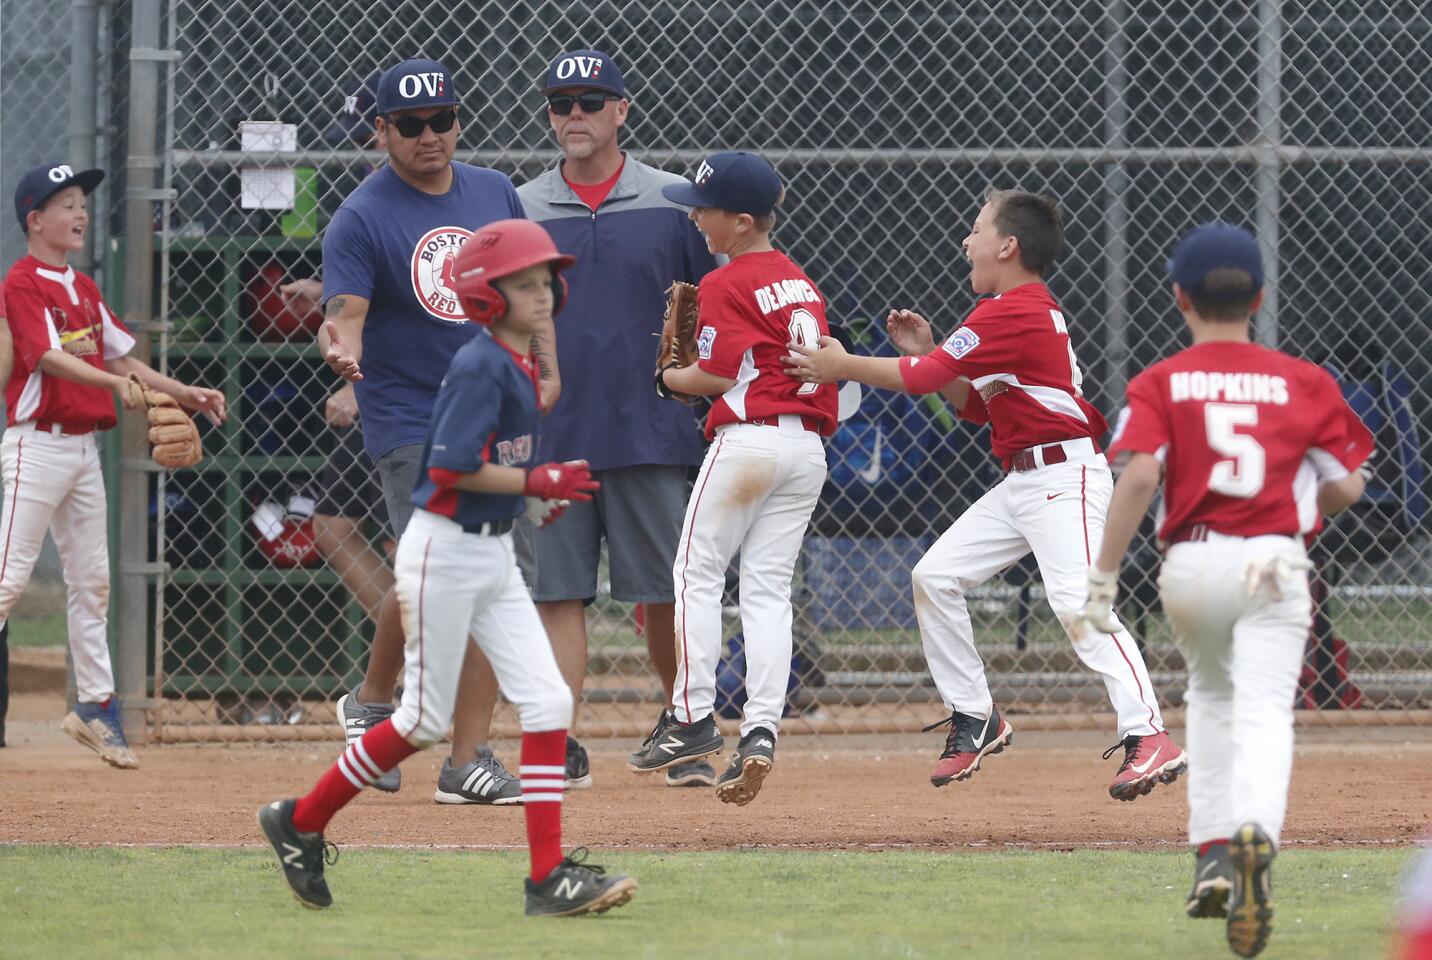 Ocean View Little League Cardinals celebrate beating the Ocean View Red Sox 1-0 in the District 62 Tournament of Champions Minor A Division championship game on Saturday at Ocean View Little League.